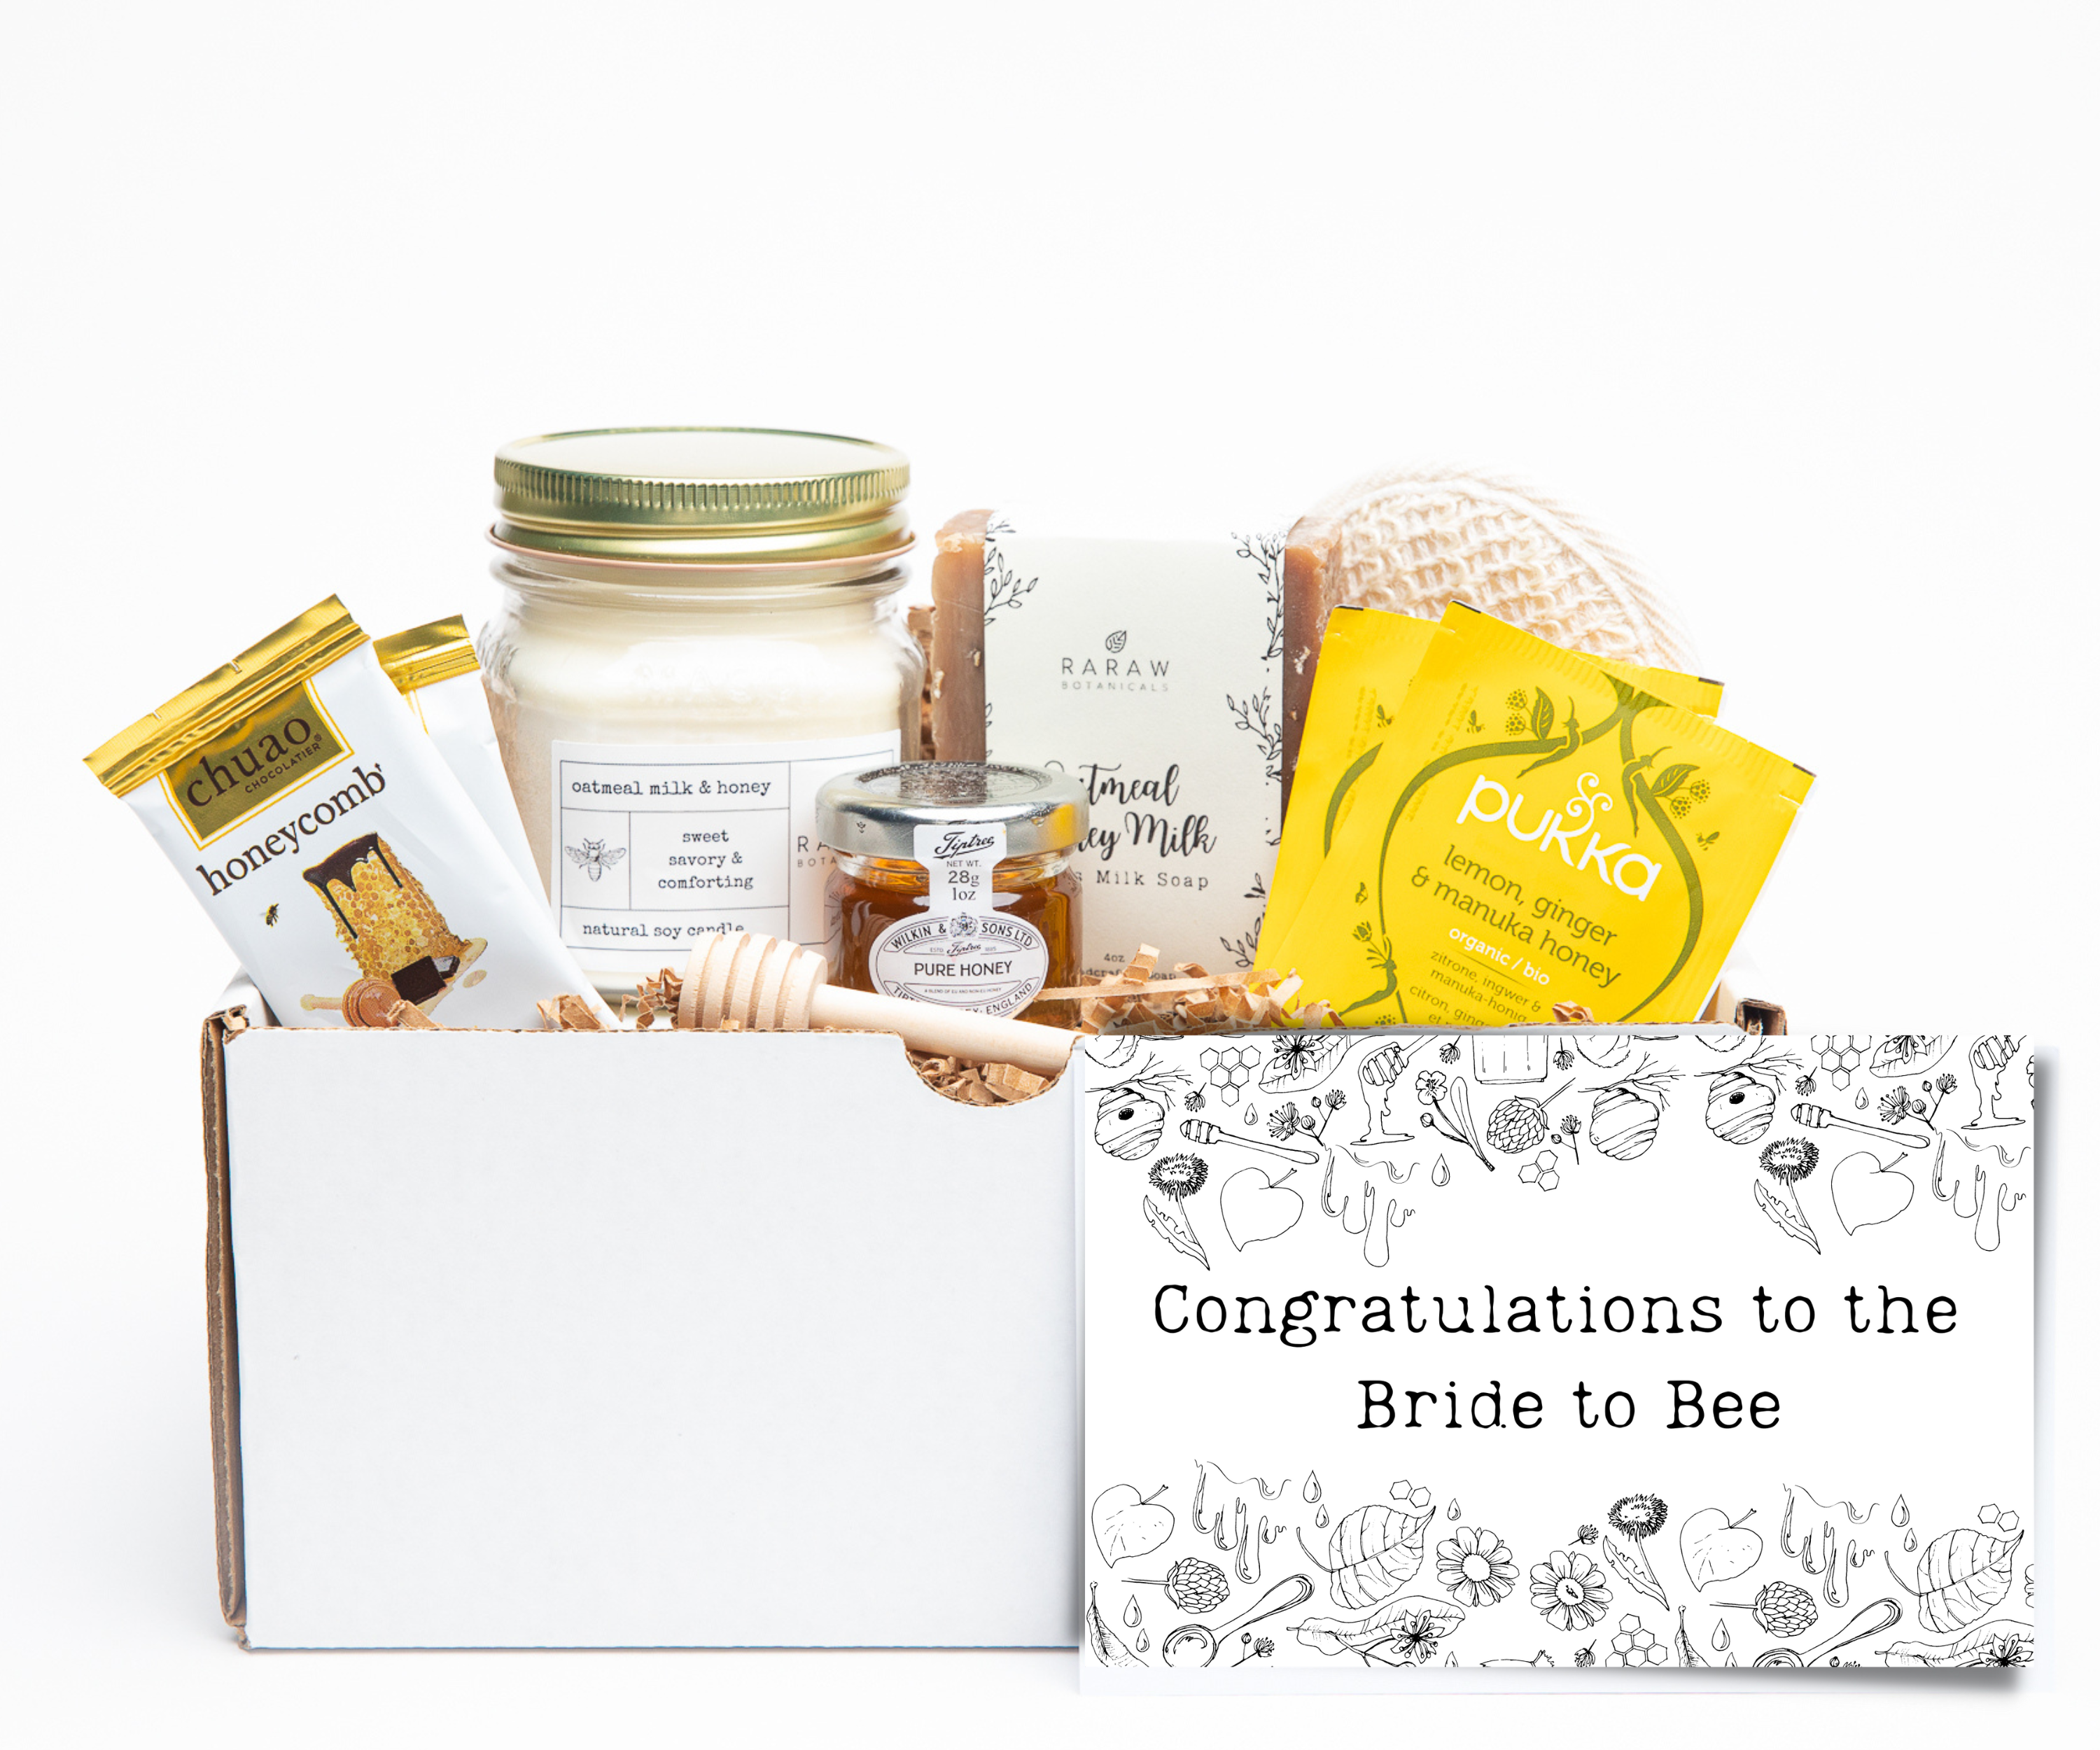 7 Bridal Shower Gifts from BHLDN - A Good Hue